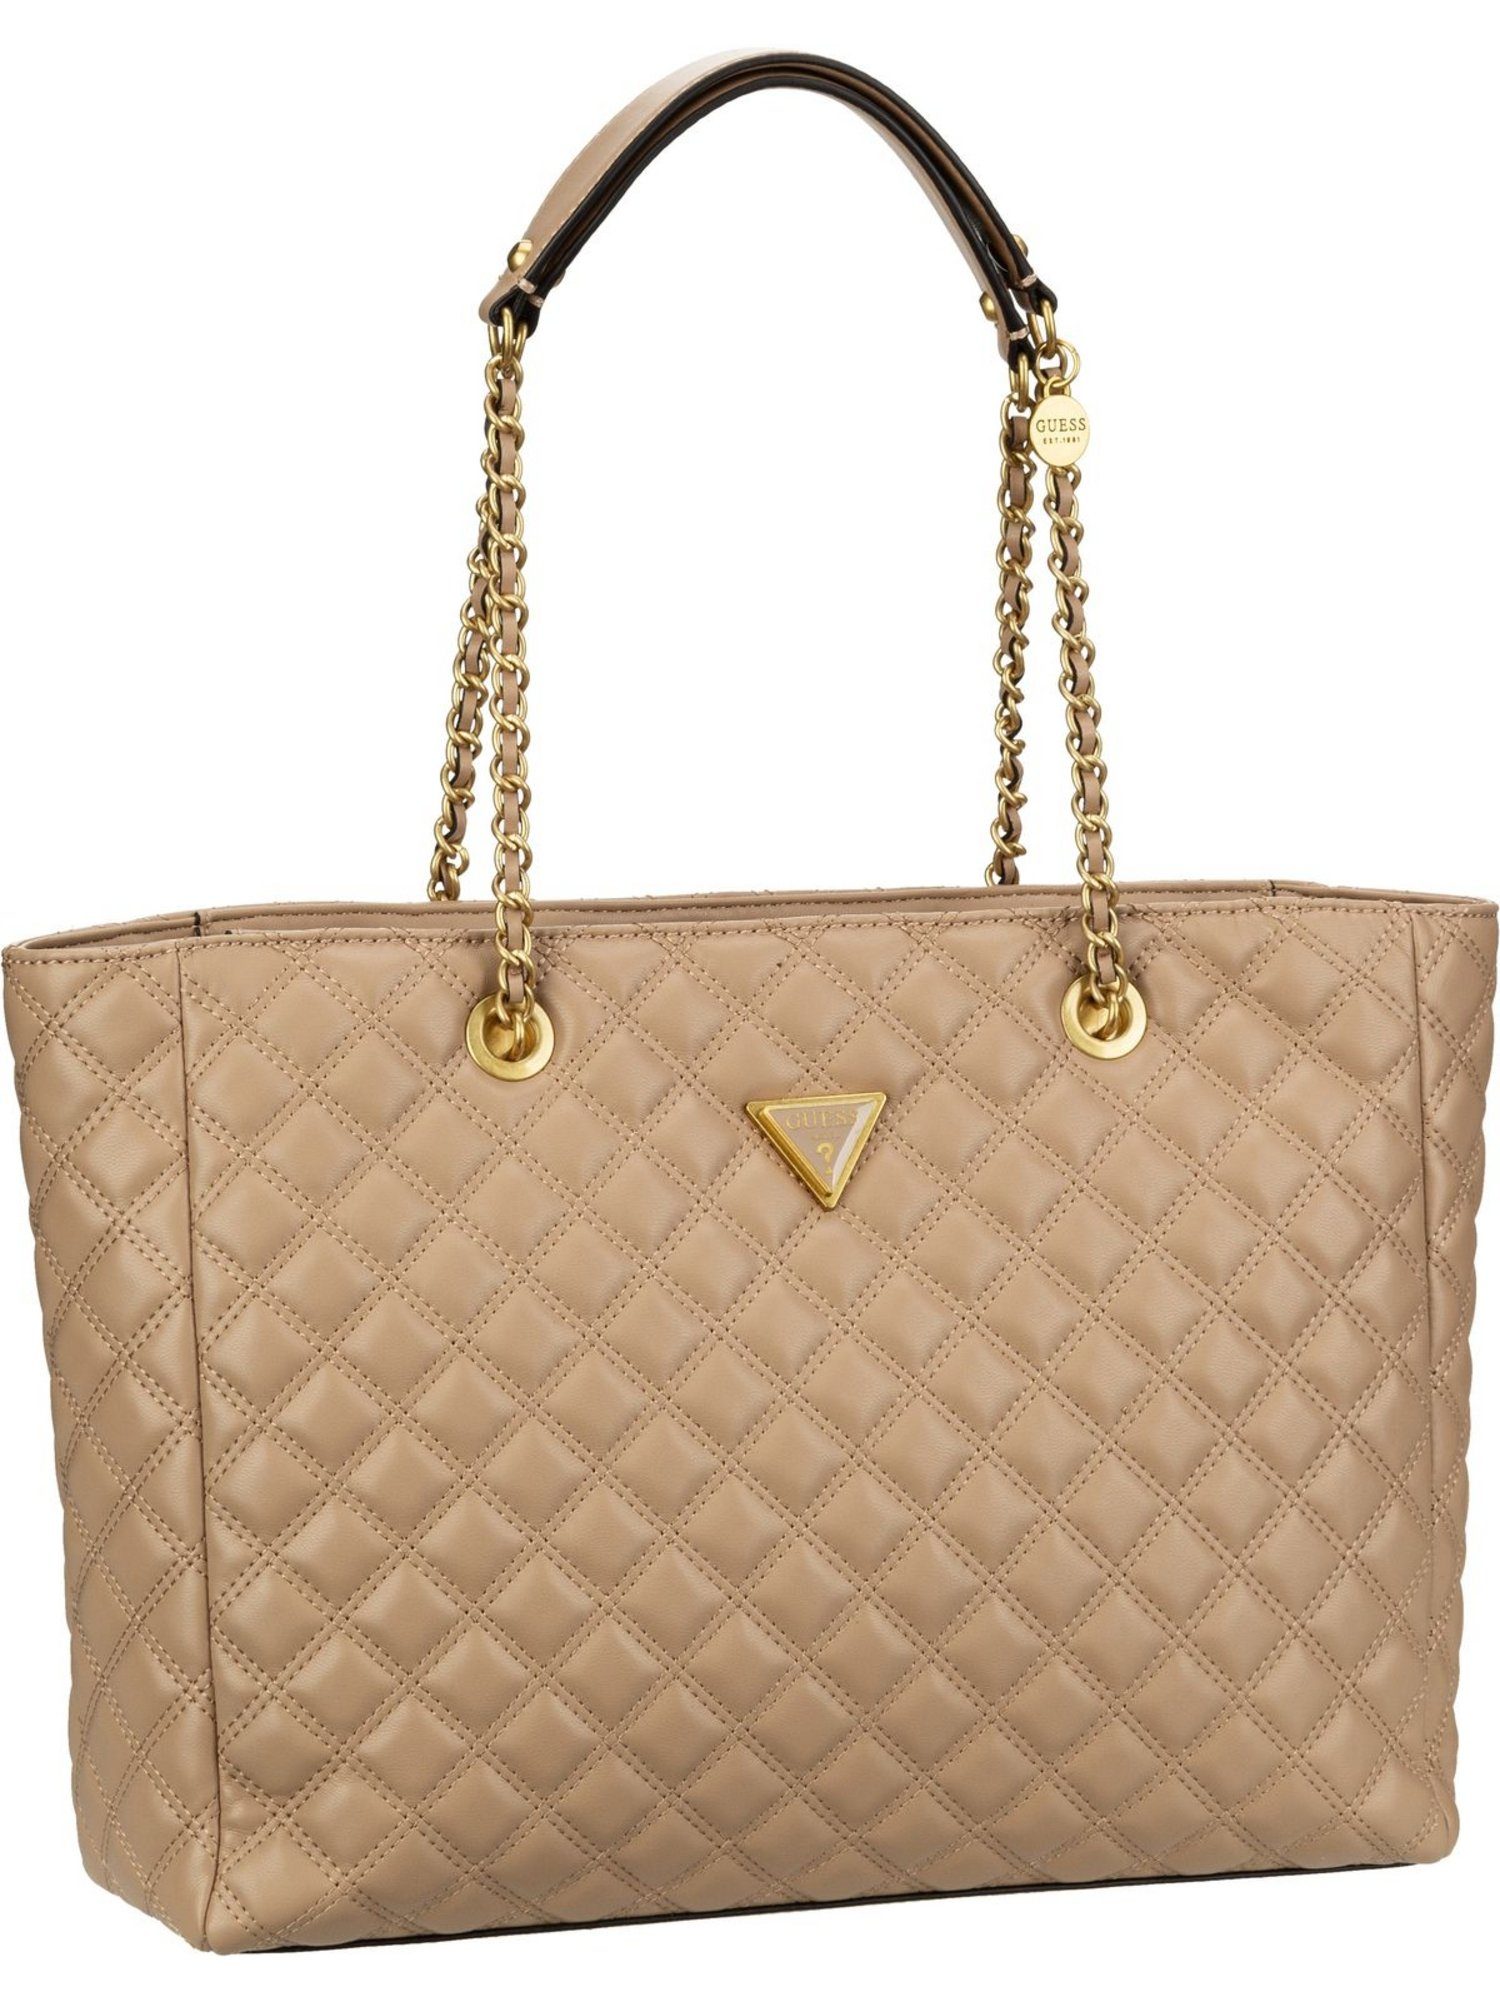 Guess Shopper Giully Tote Beige